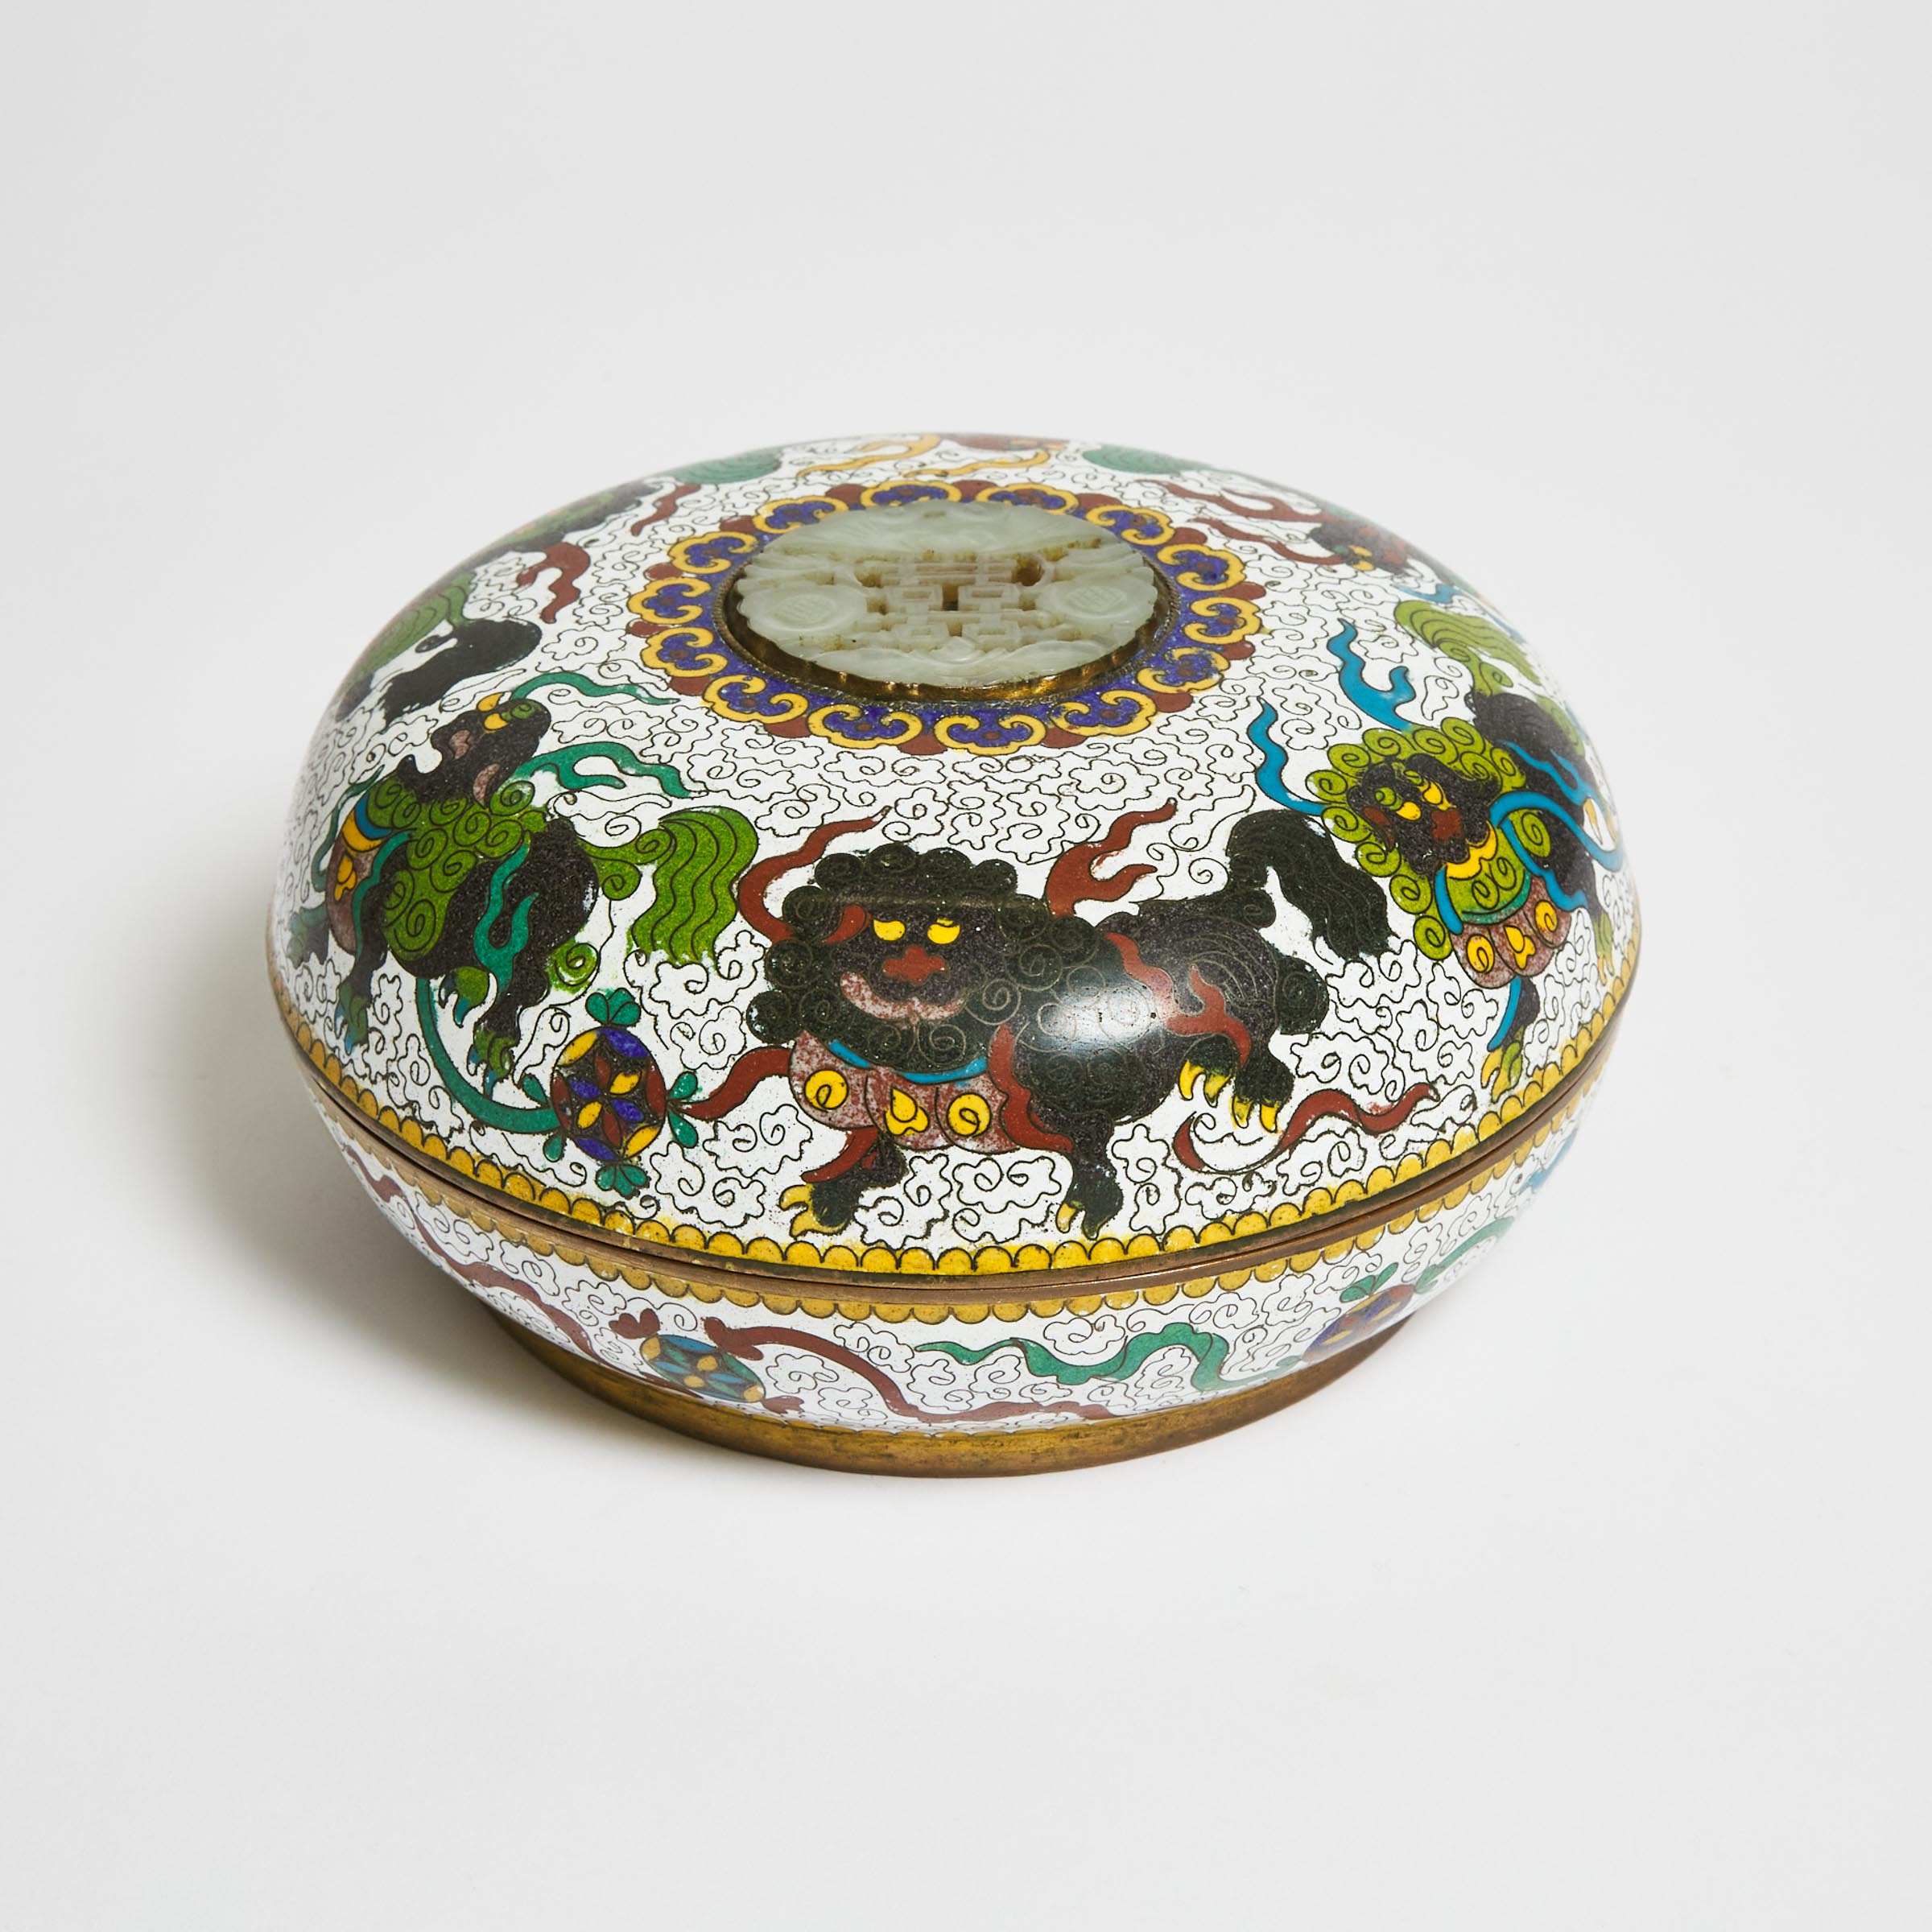 A Jade Inset Cloisonné Box and Cover, Mid 20th Century